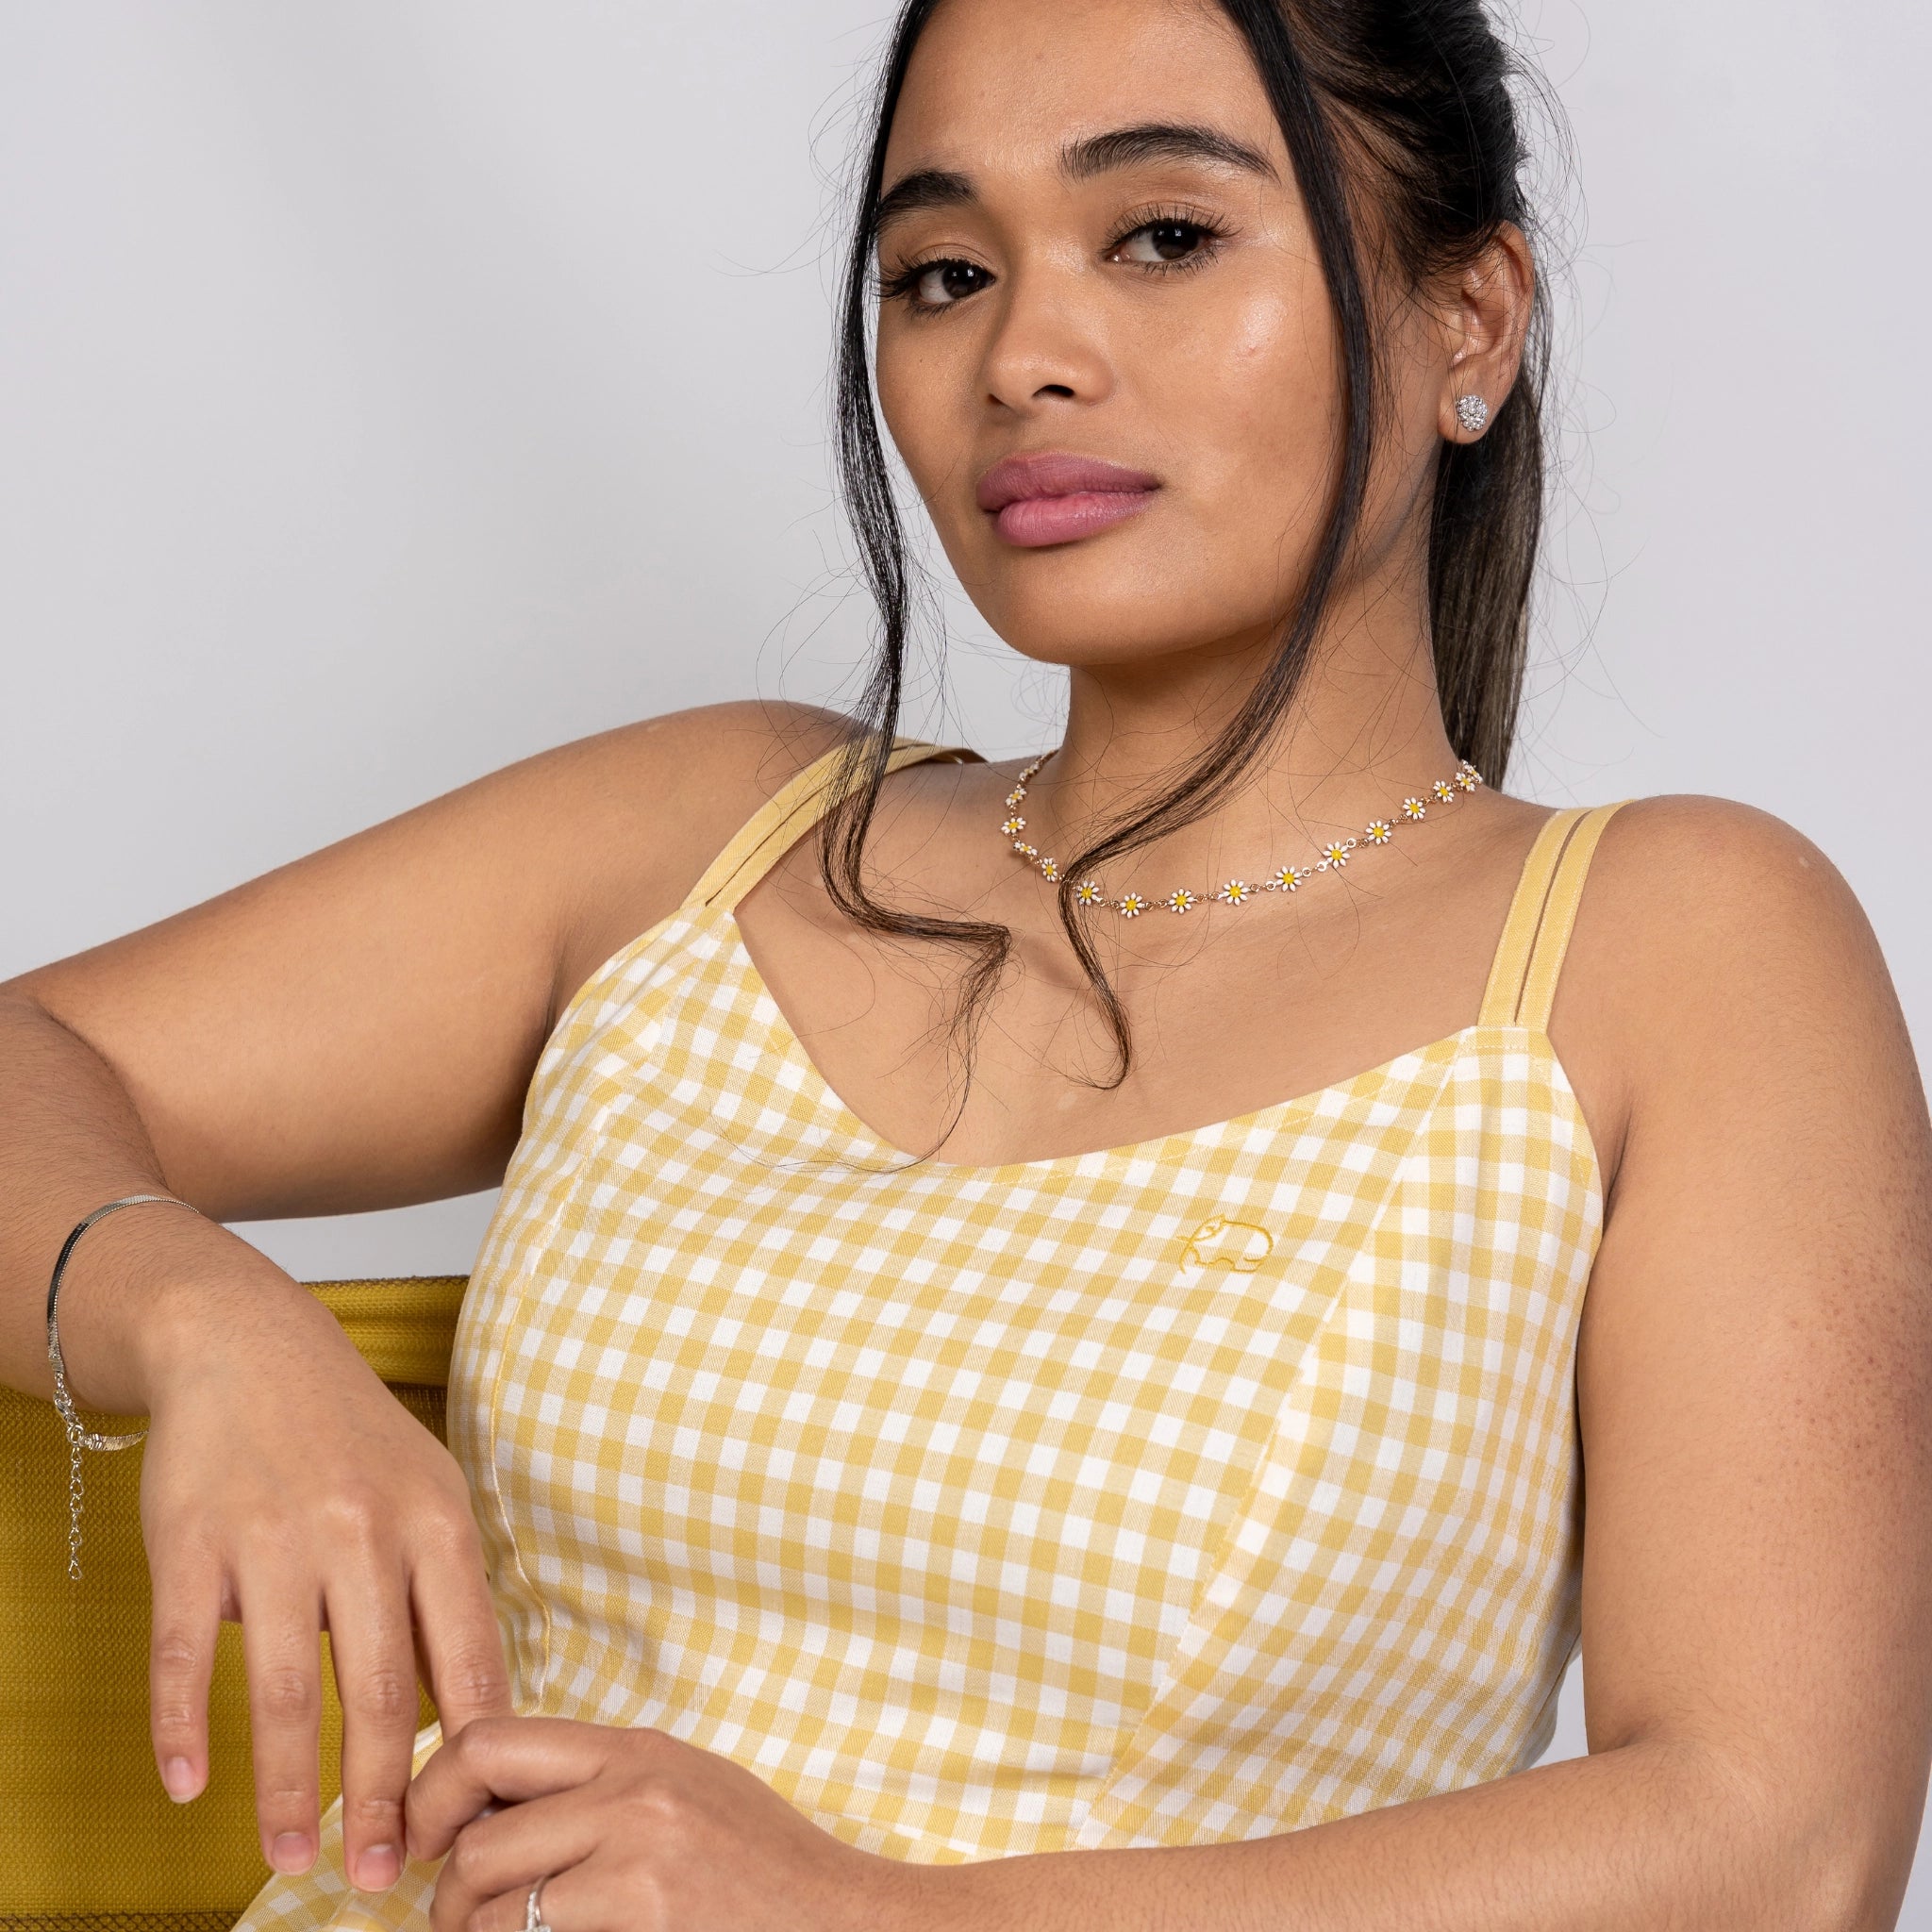 Woman wearing a Karee Sunshine Chic Yellow Plaid Cotton Mini Dress and a gold necklace, sitting and looking at the camera with a subtle smile.